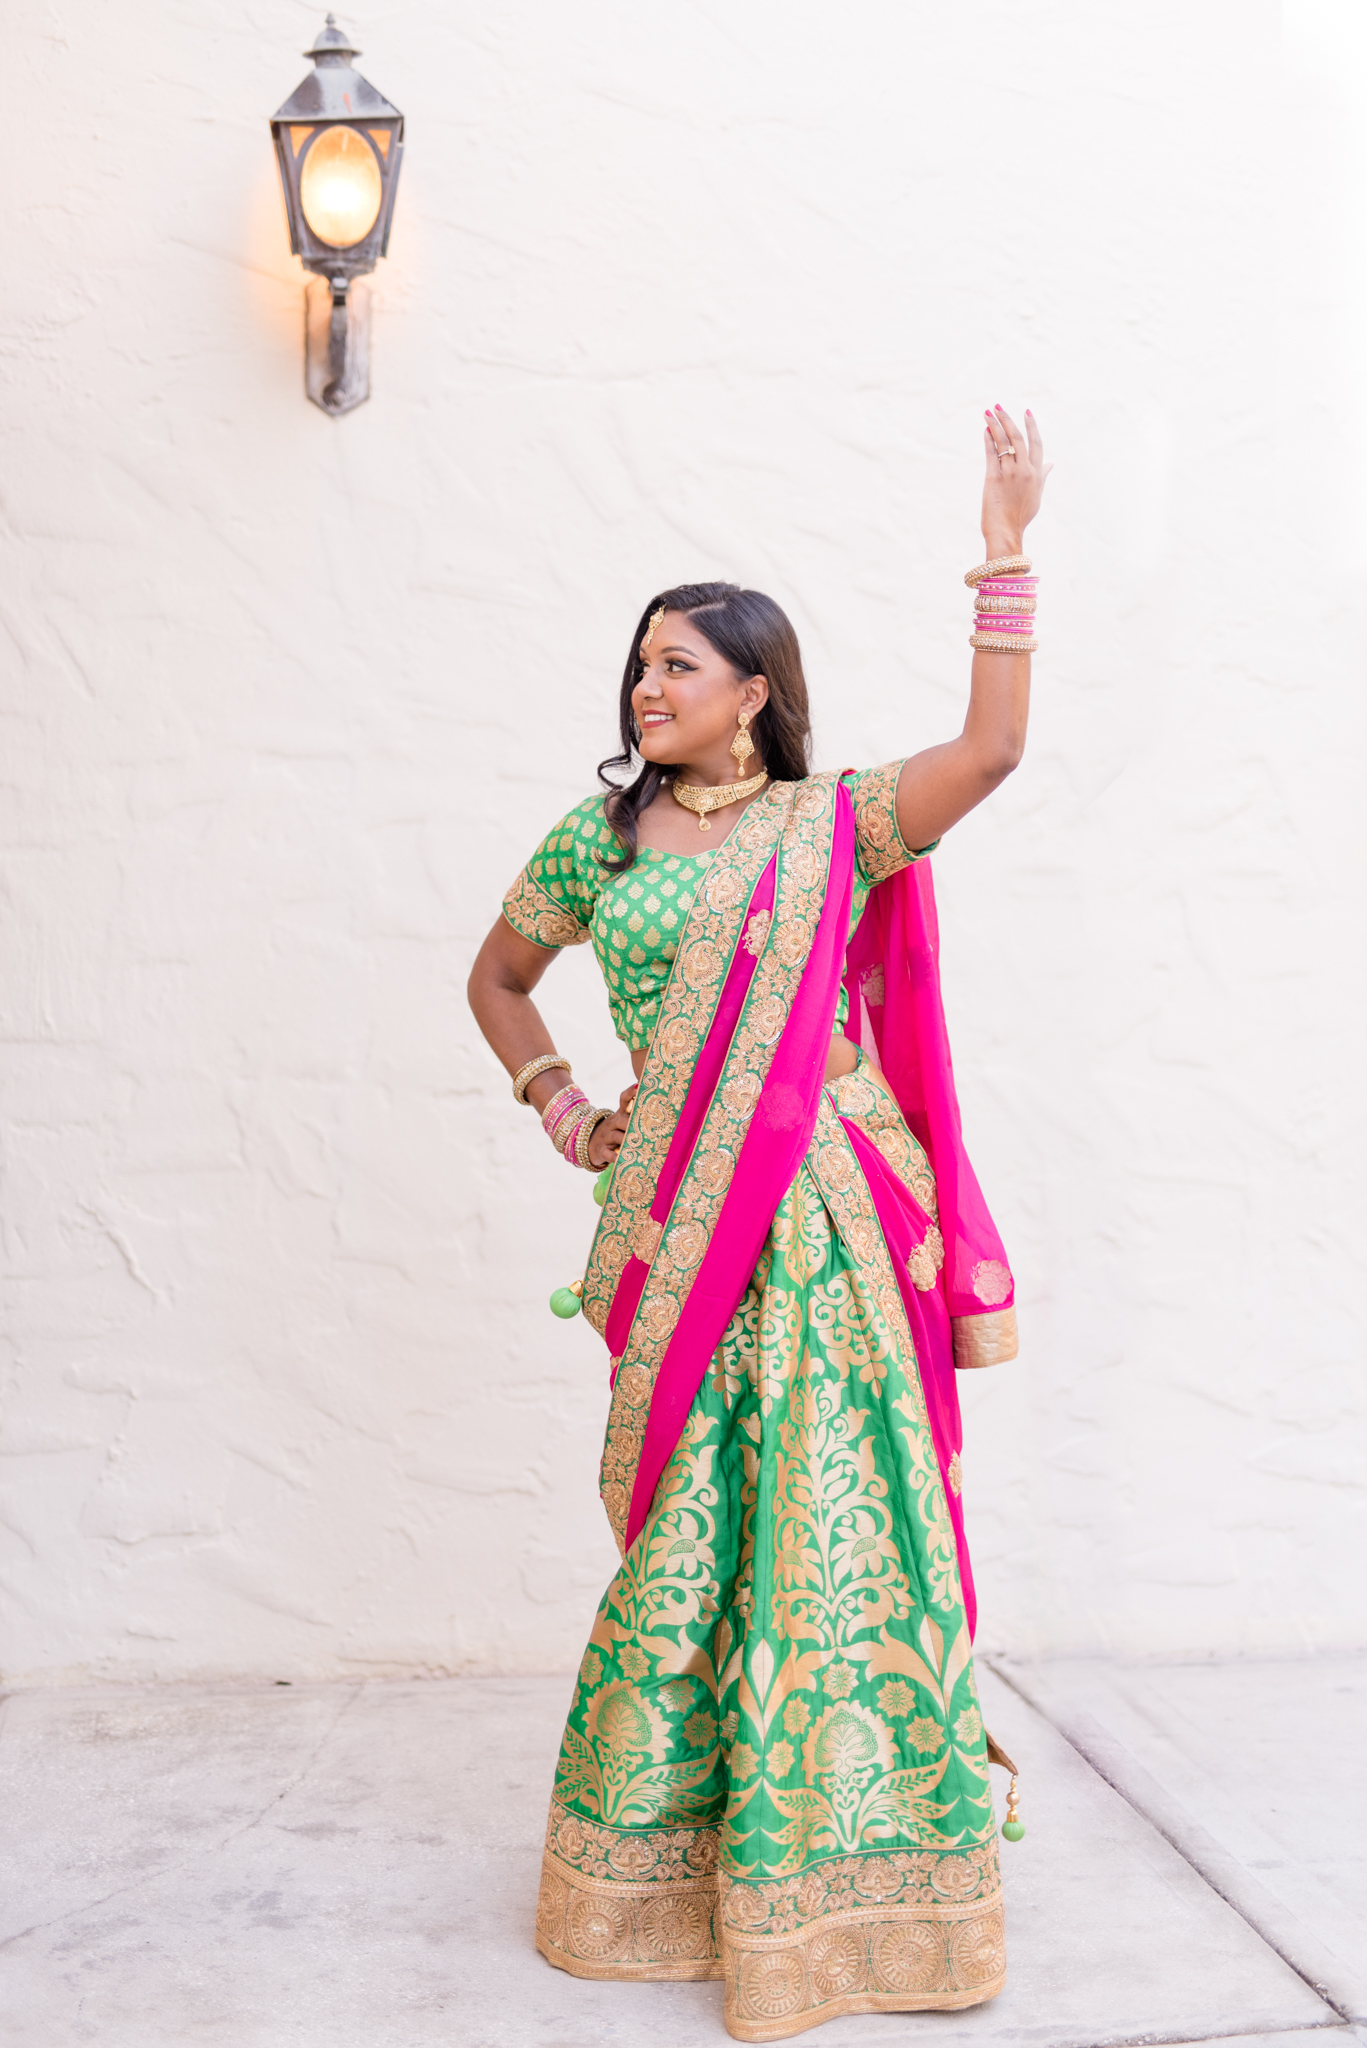 Woman poses in traditional Indian outfit.